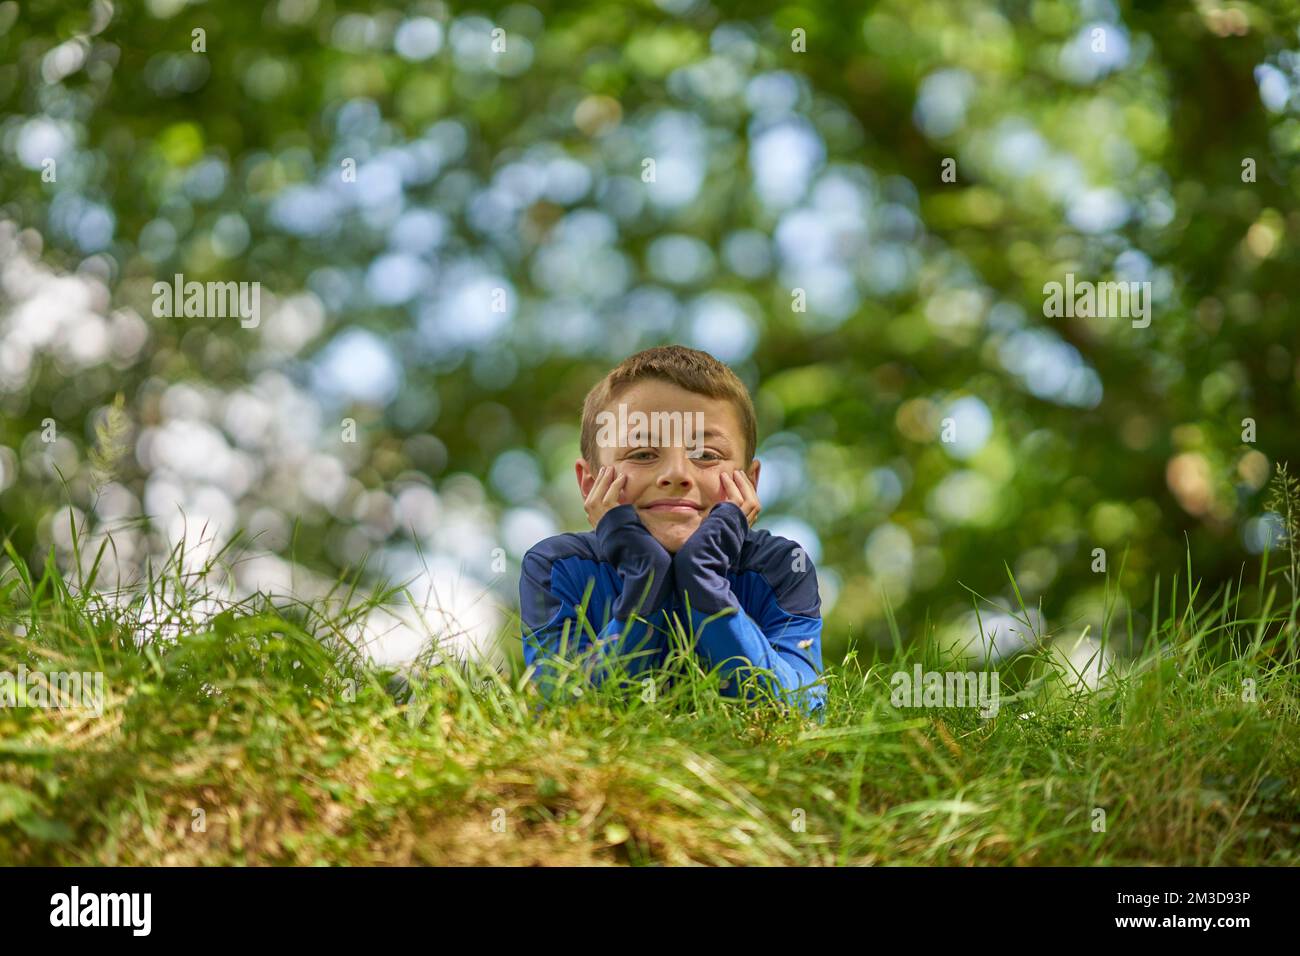 A portrait of a young happy boy in a green park, in deep thought. Stock Photo